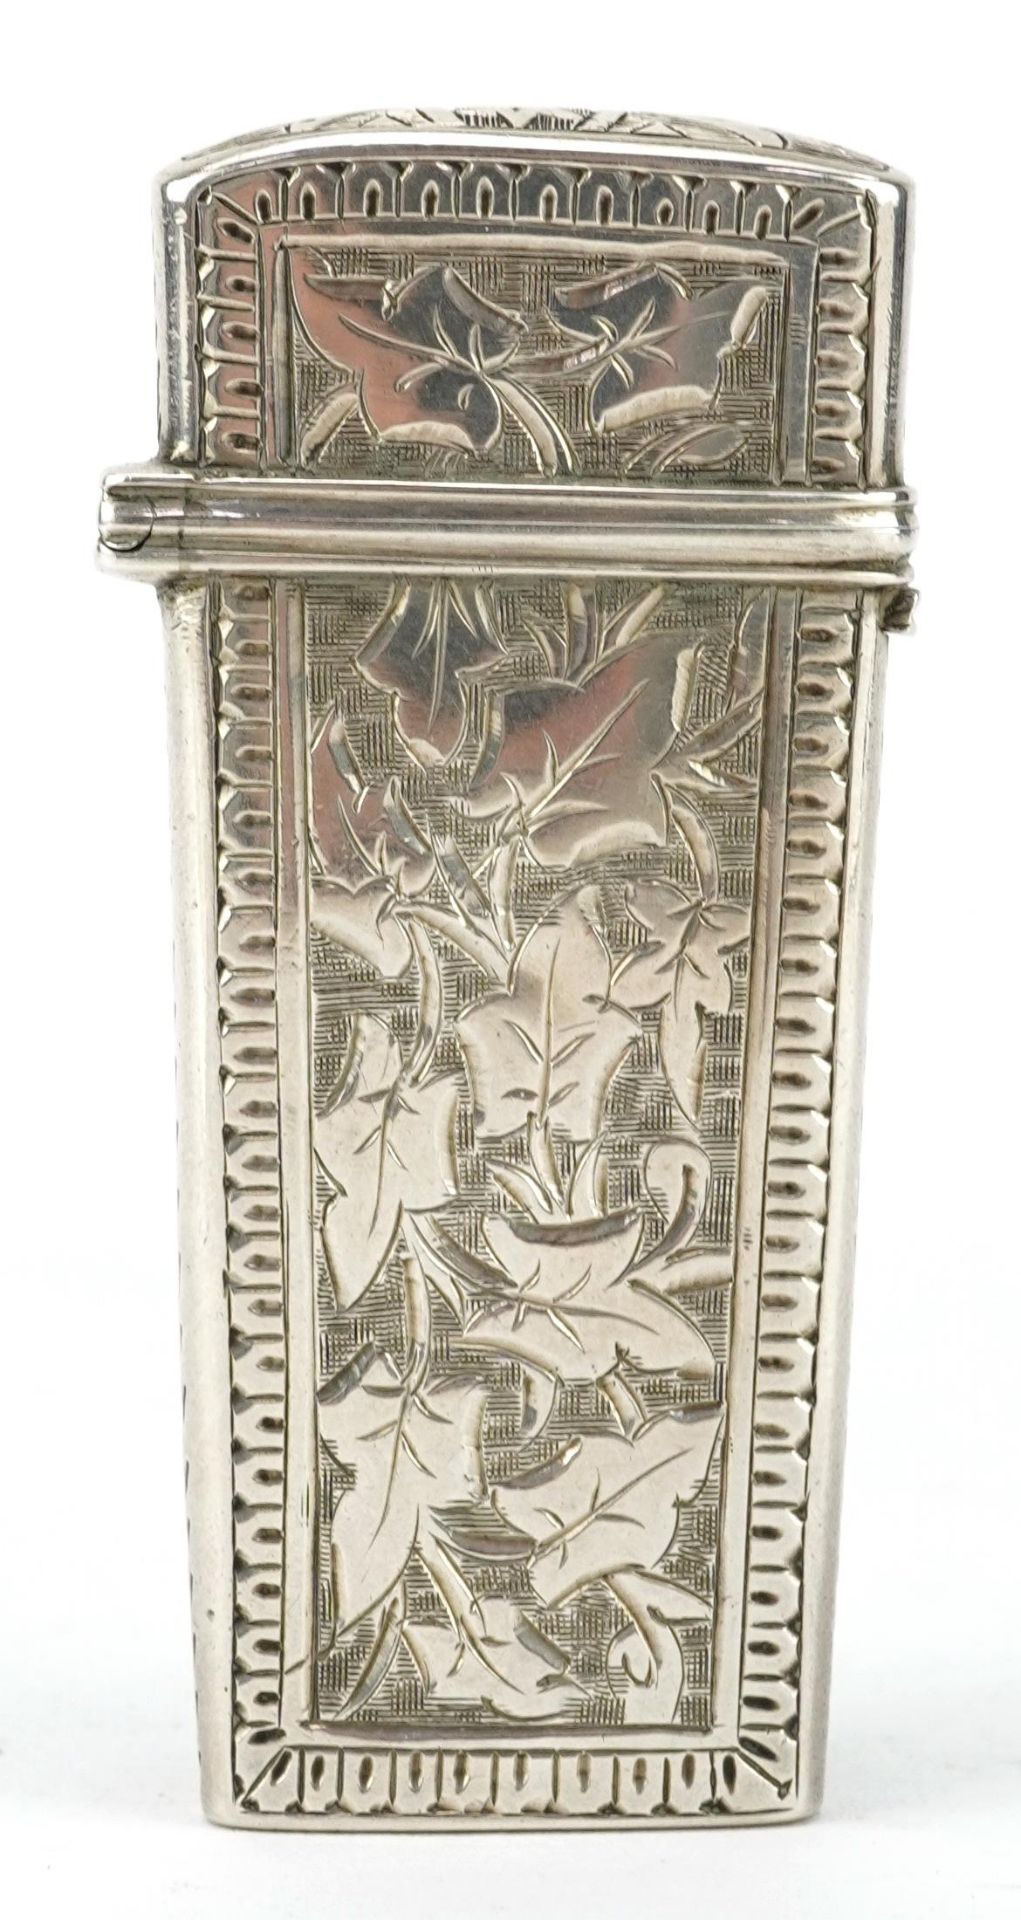 Hilliard & Thomason, Victoria silver needle case engraved with ivy leaves on vines, Birmingham 1878, - Image 2 of 3